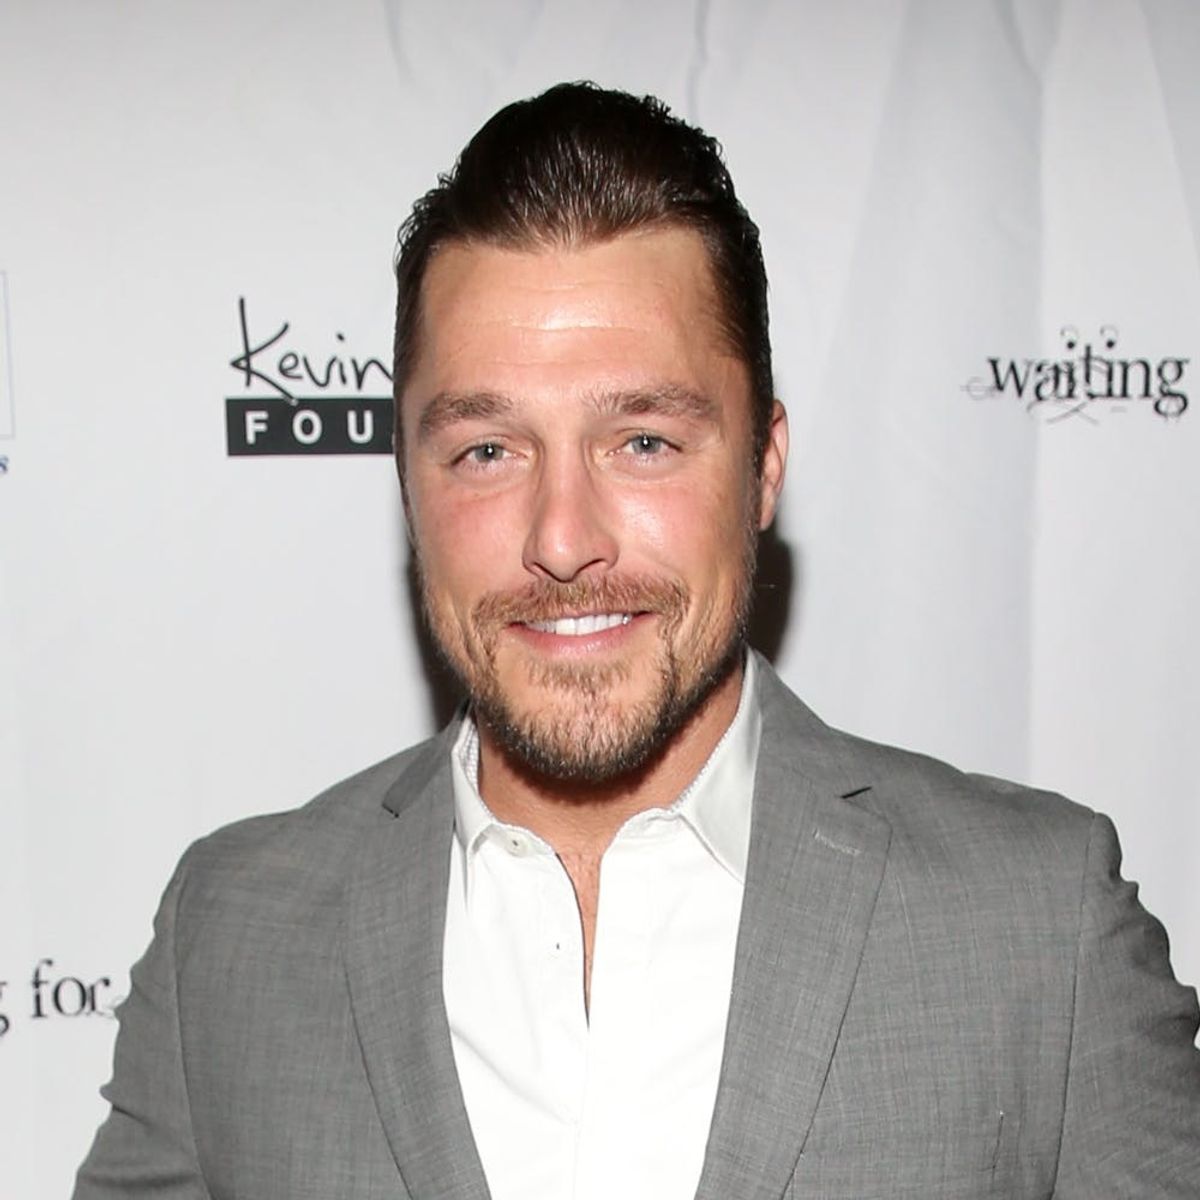 The Bachelor’s Chris Soules Claims He Didn’t Flee the Scene of a Fatal Accident